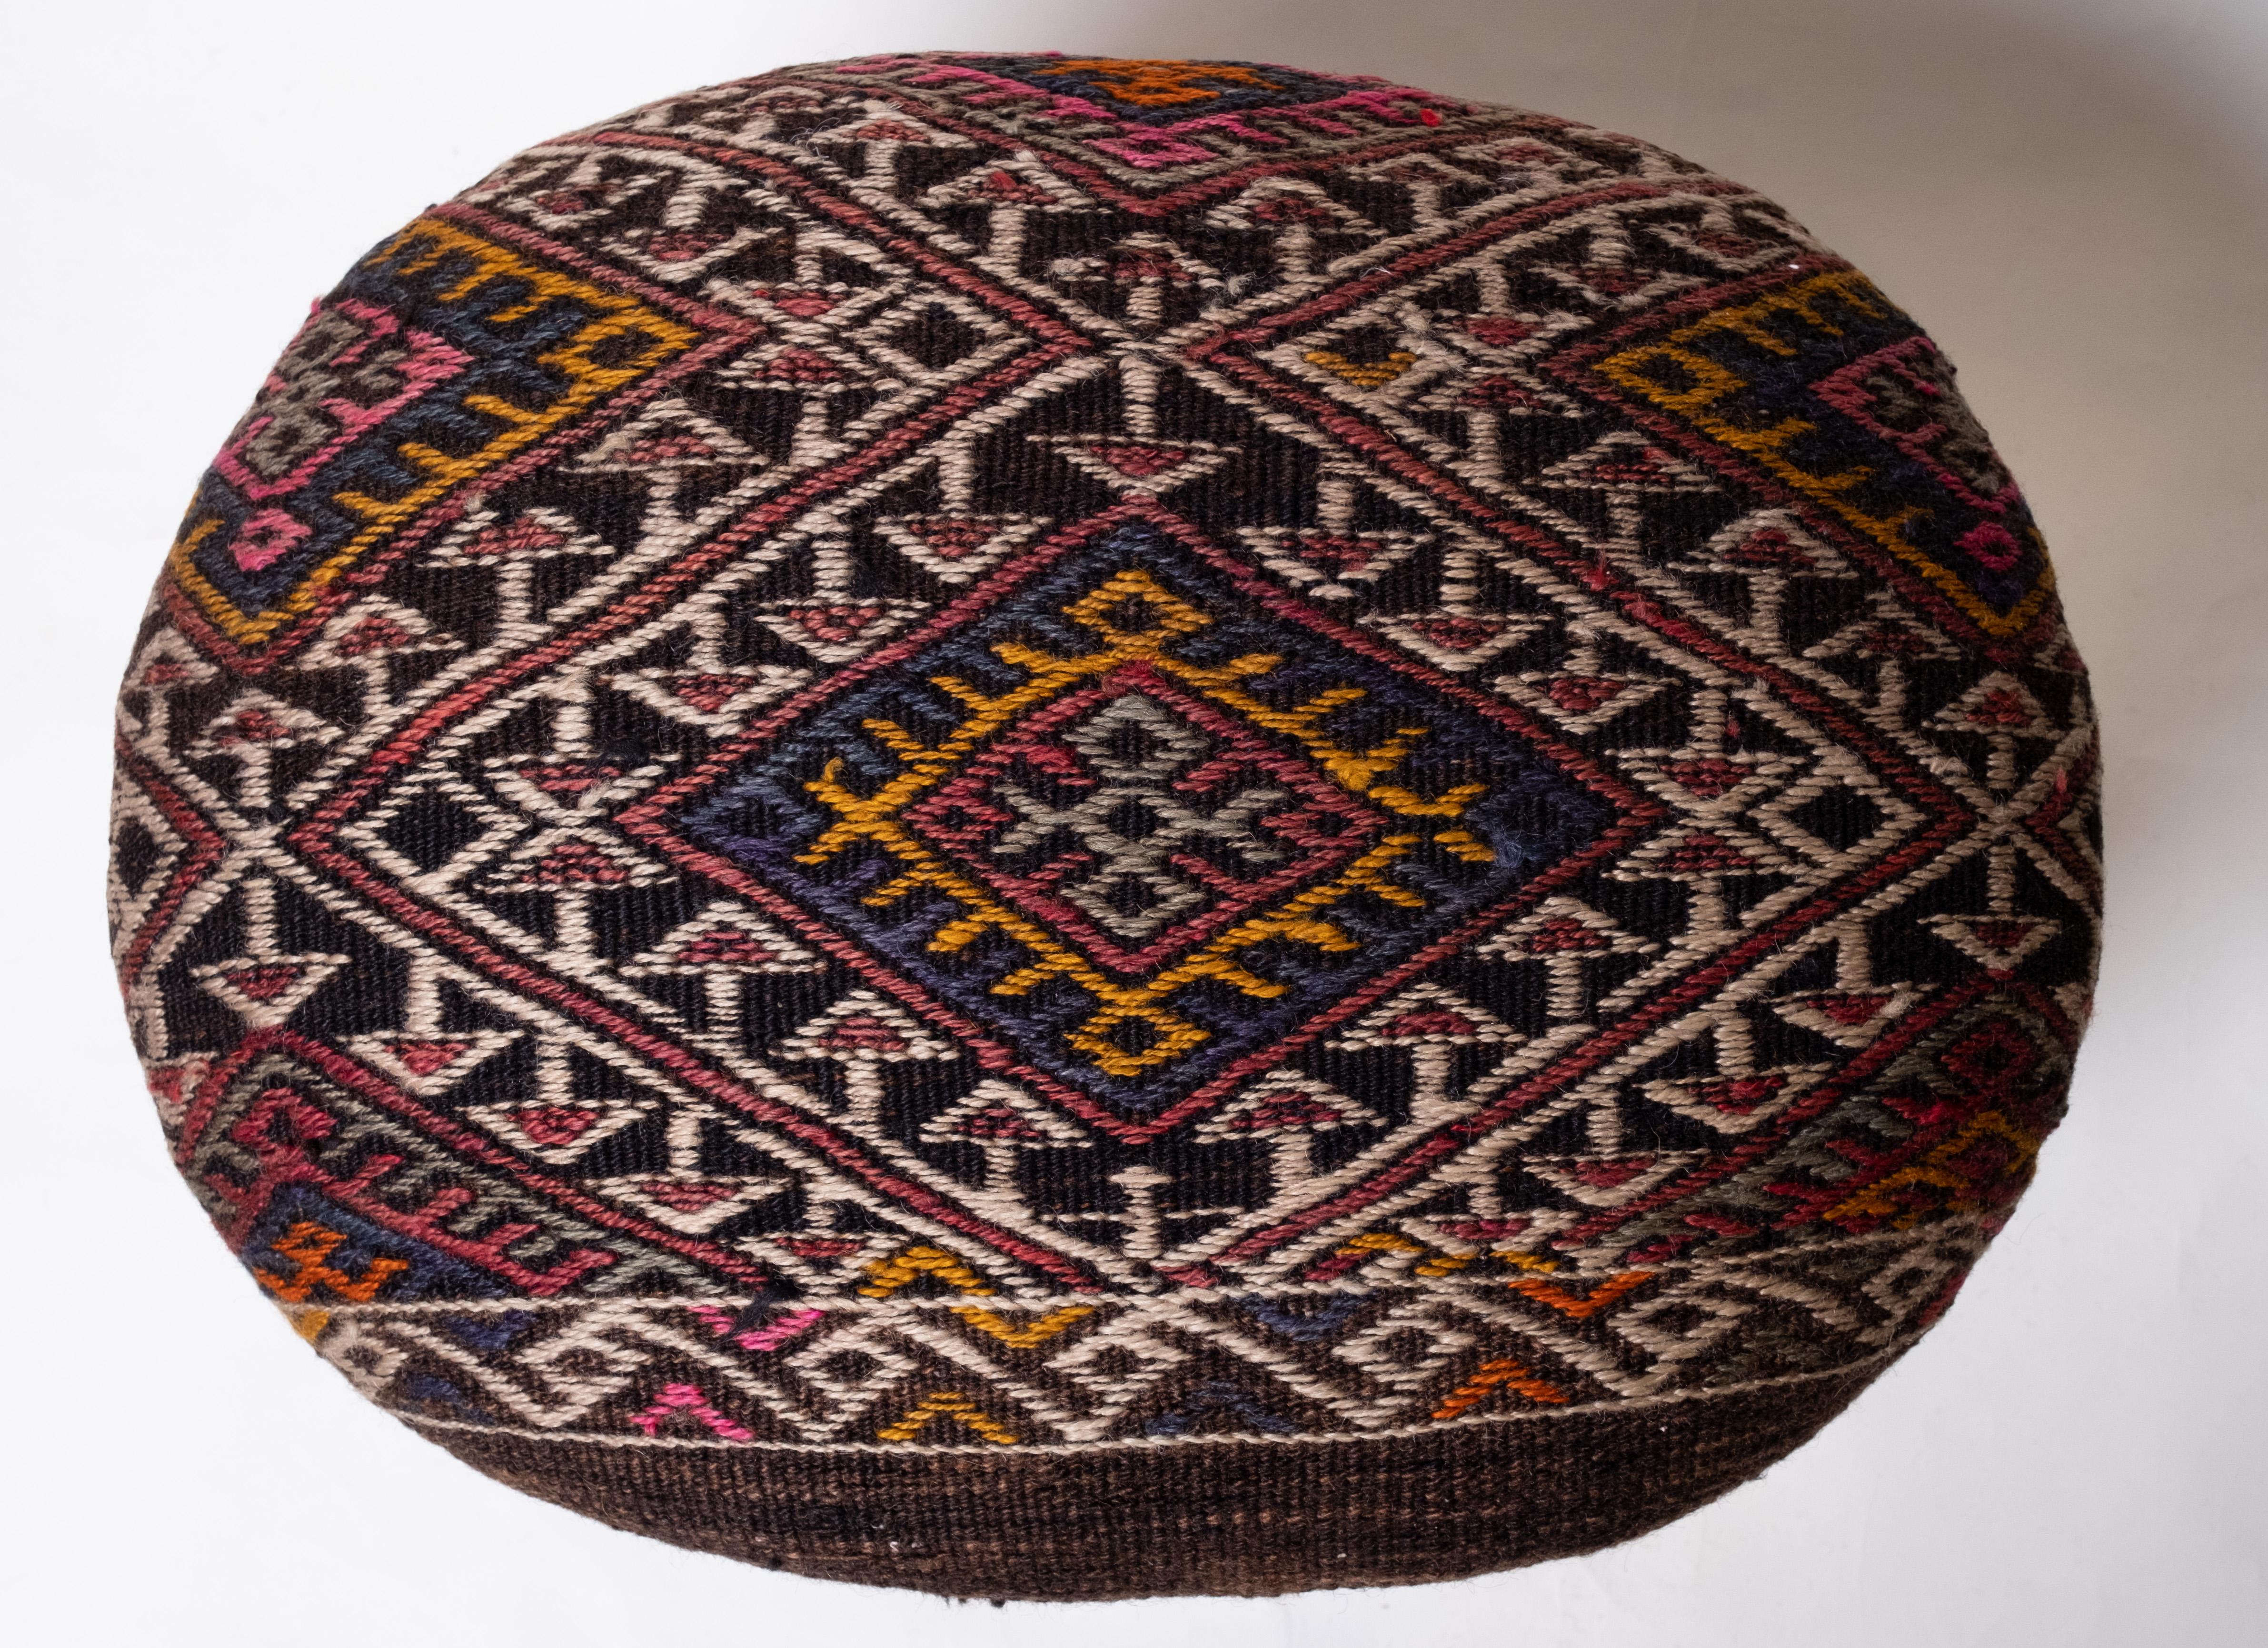 We made an oak wood ottoman using the undamaged part of the precious and high-quality old & antique kilims that cannot be repaired as a whole. Like a painting, a part of the scenery is cut out from a kilim, and even several covers cut out from the